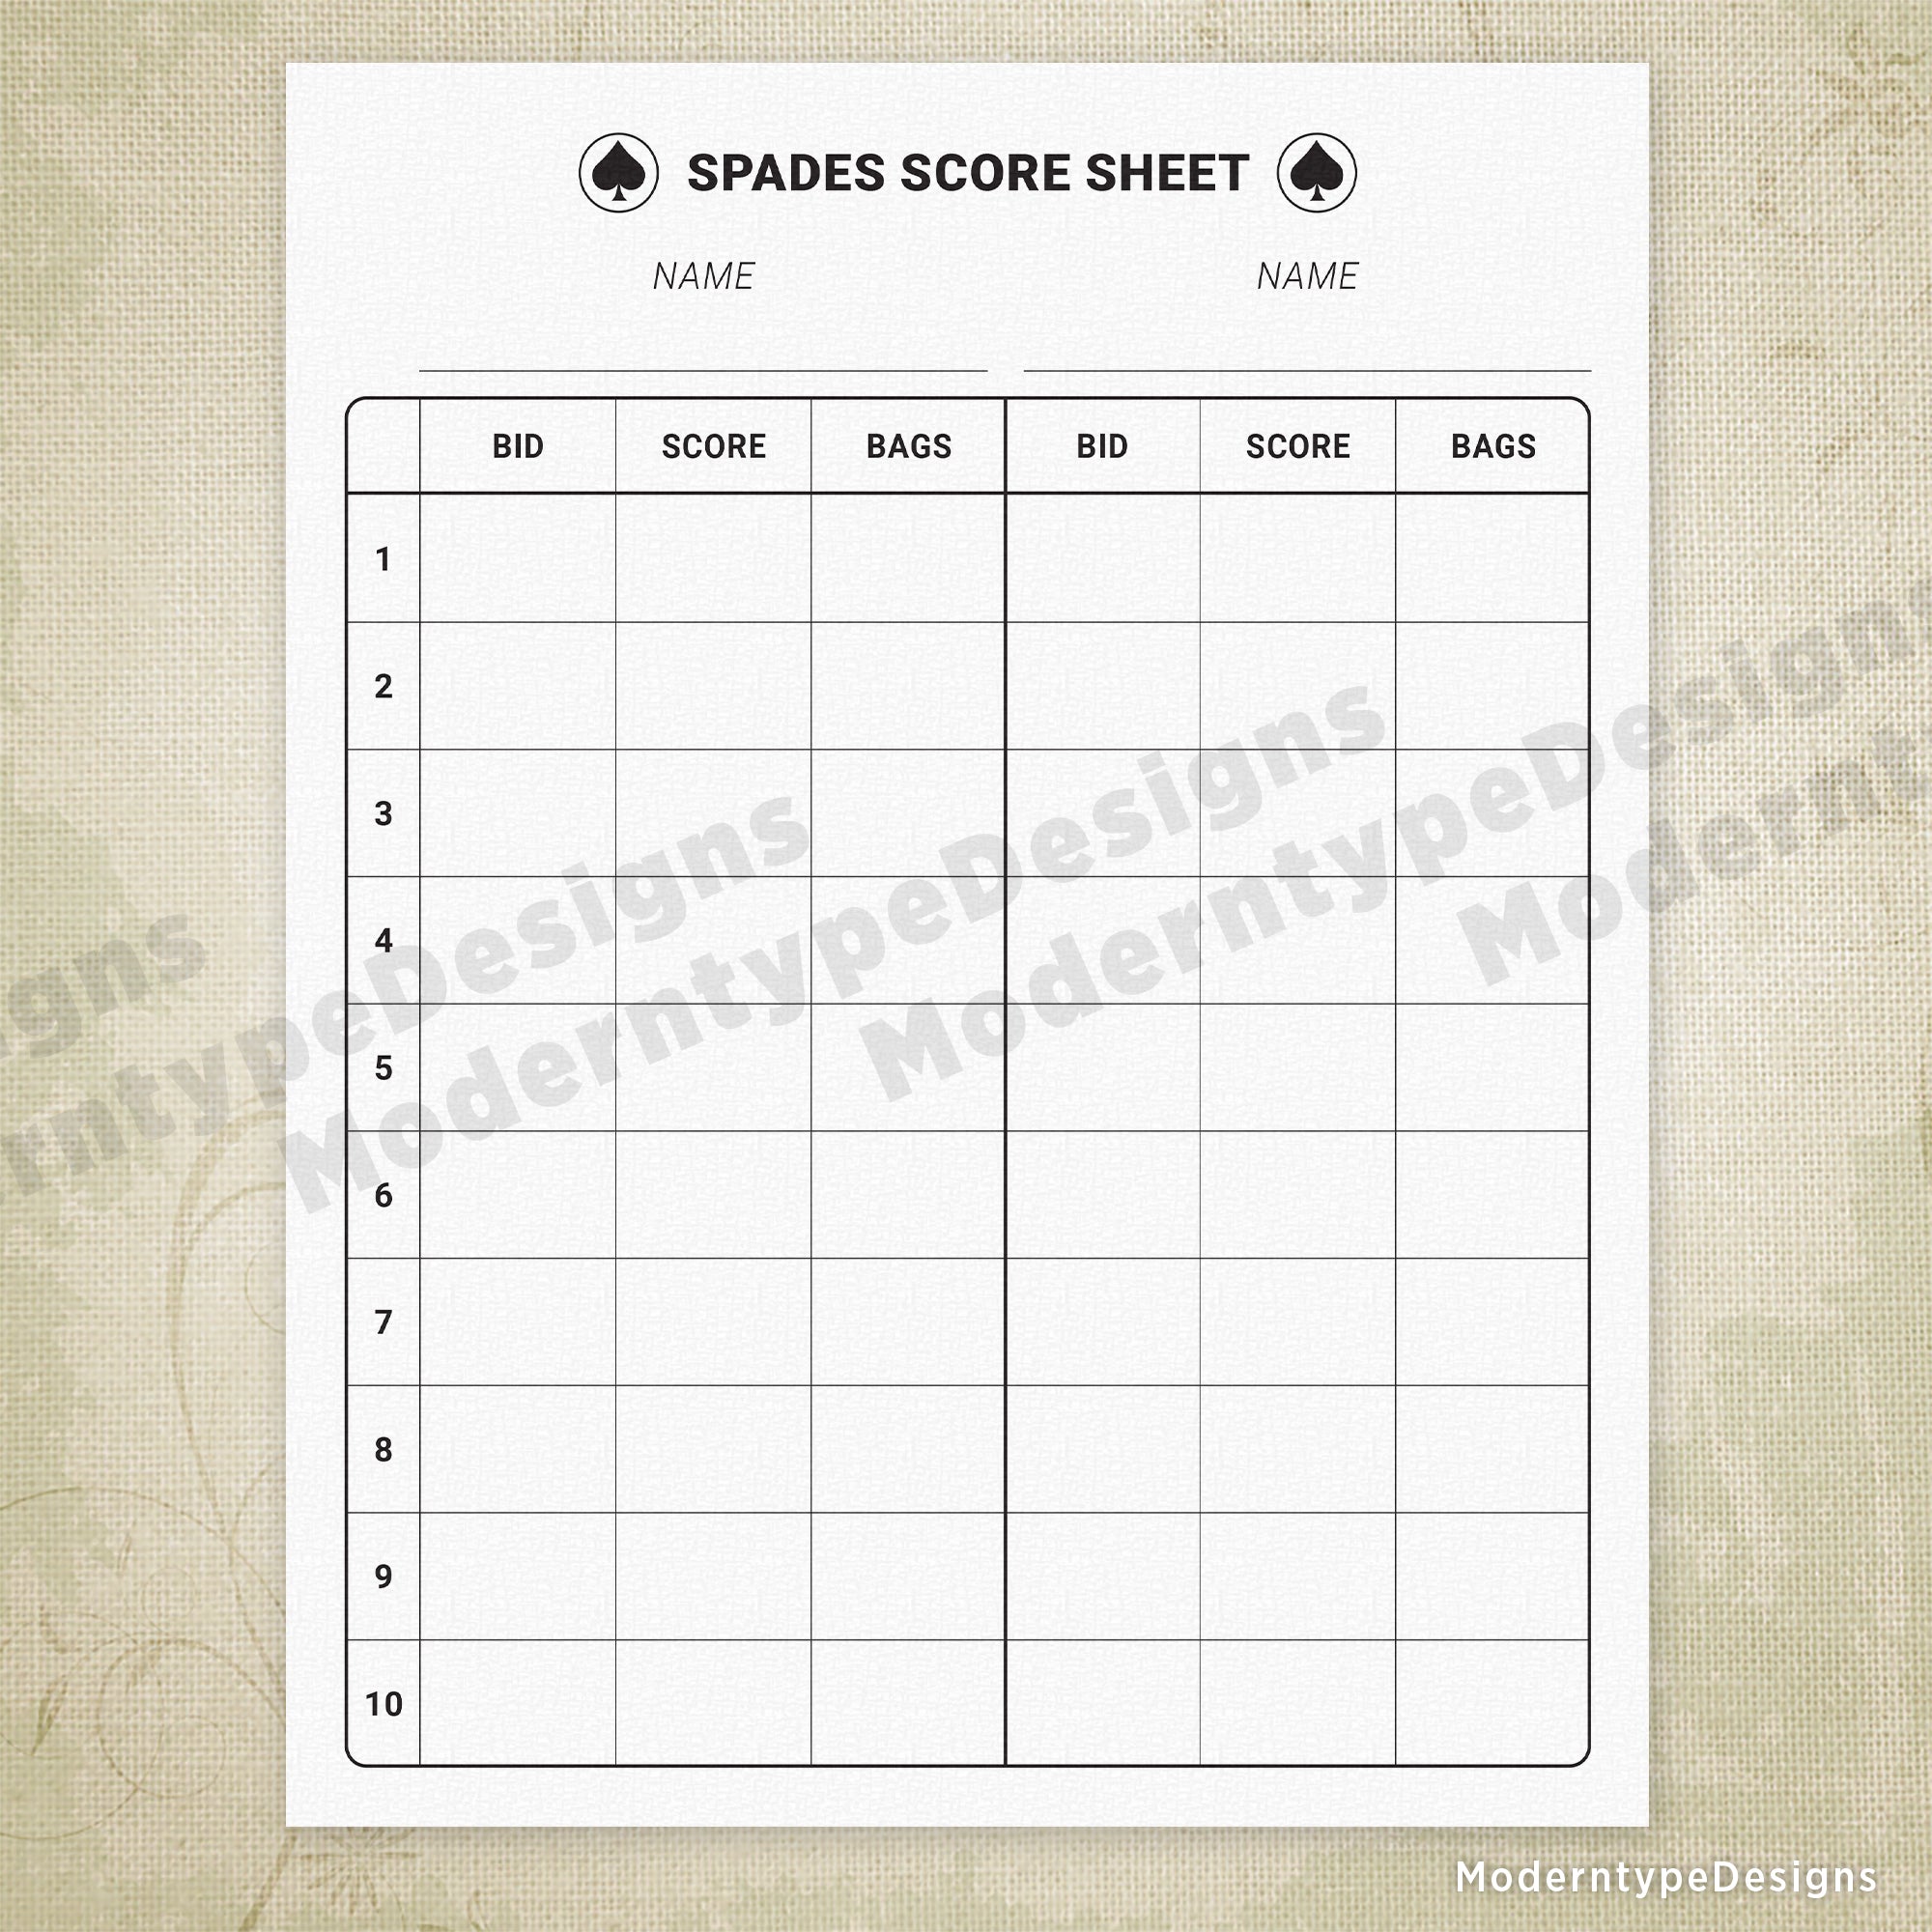 Cards Game Score Sheet Book: 100 Large Score Sheet Pages For